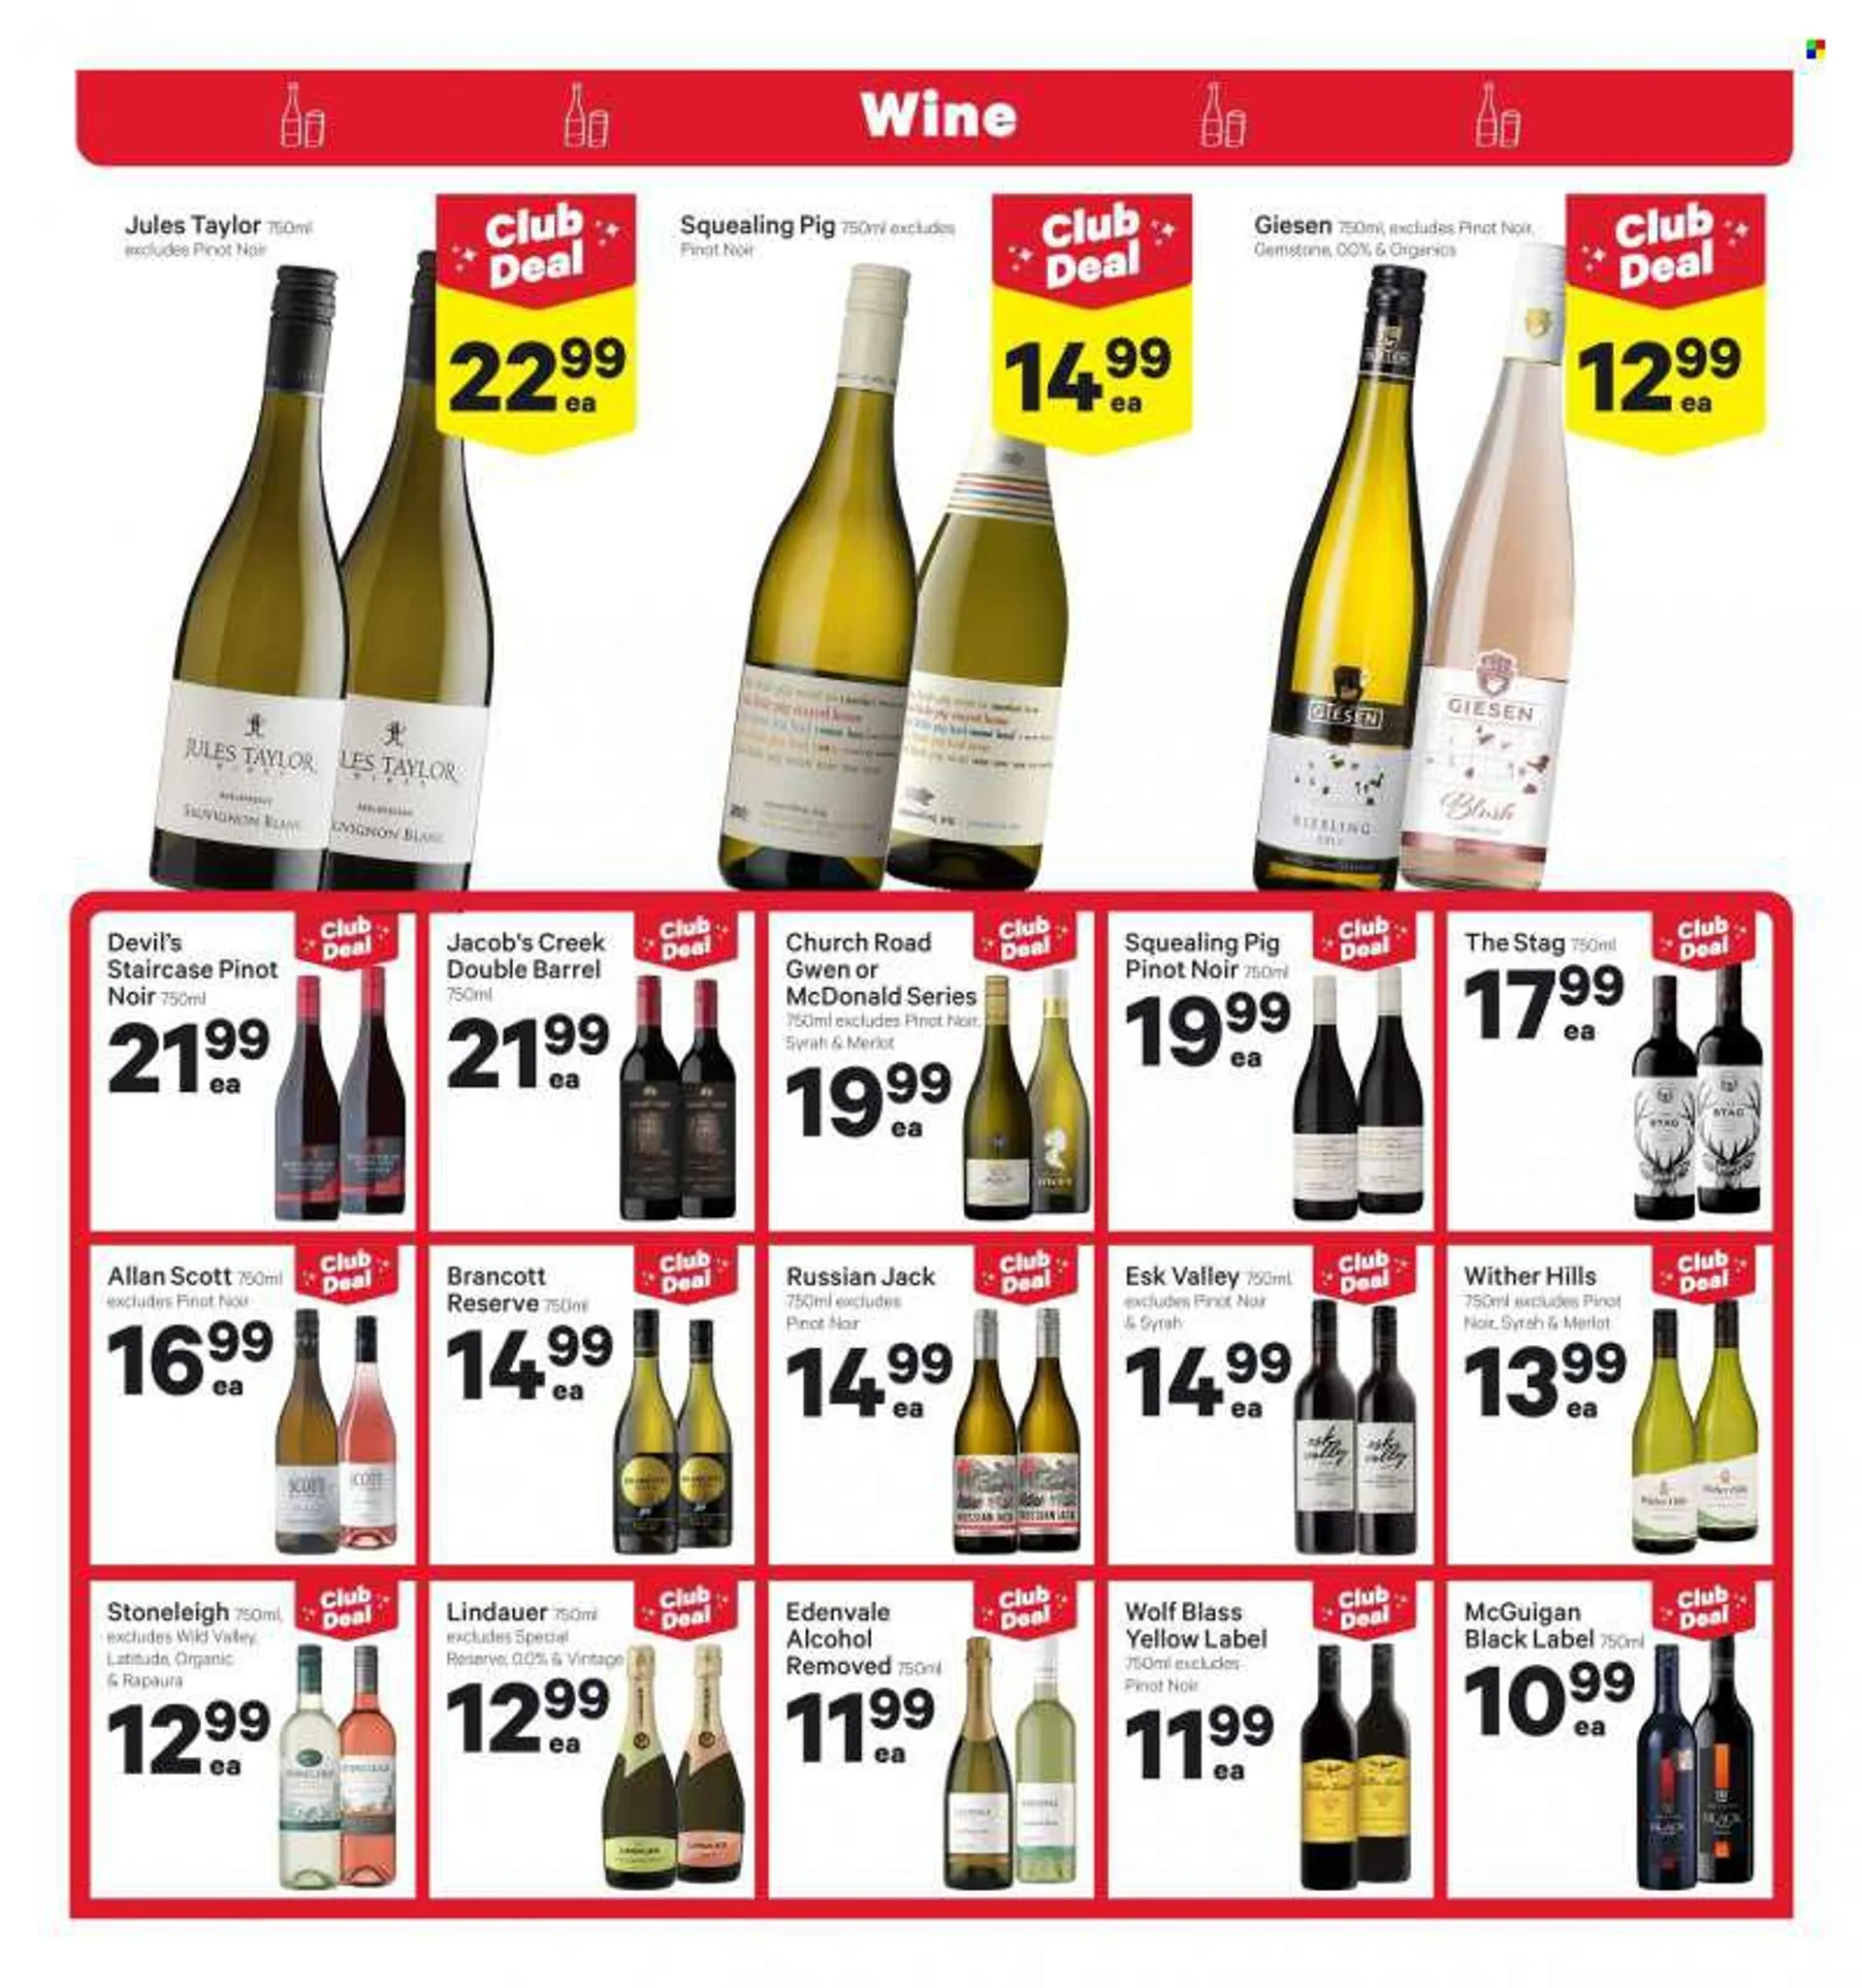 New World mailer - 13.06.2022 - 19.06.2022 - Sales products - red wine, sparkling wine, wine, Merlot, Pinot Noir, Lindauer, Jules Taylor, alcohol, Wither Hills, Syrah, Jacobs Creek, Scott, Hills. Page 21.